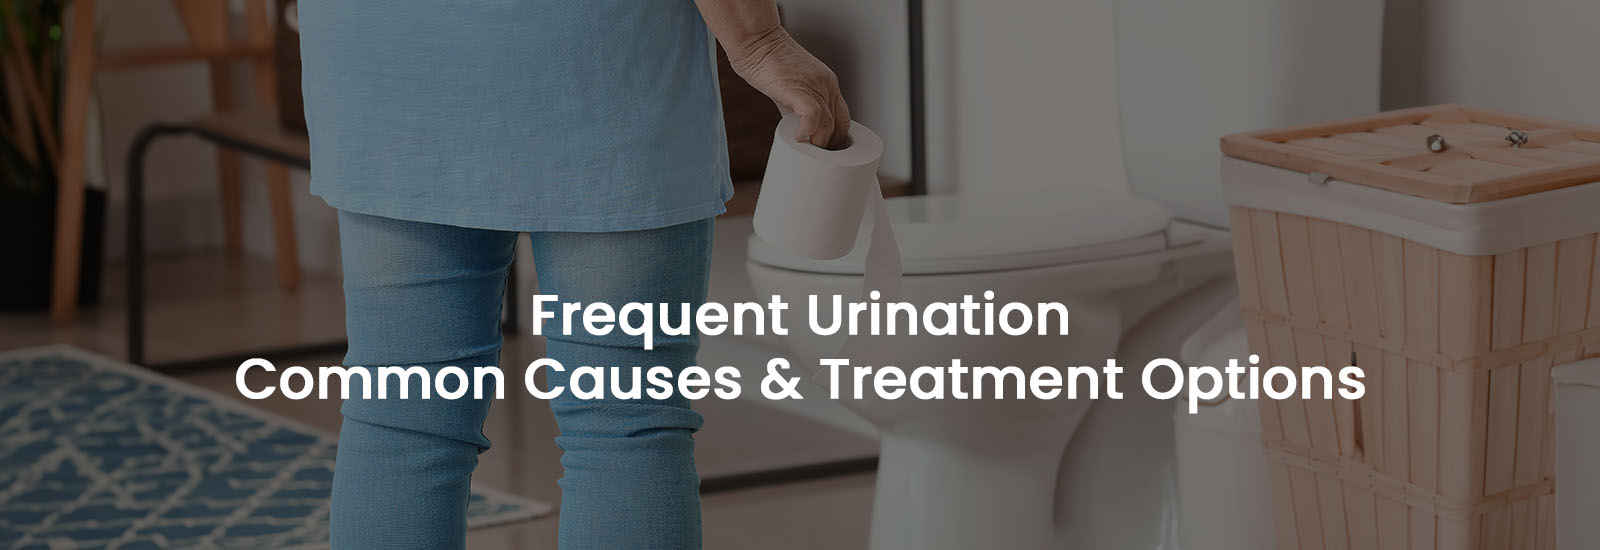 Frequent Urination Common Causes & Treatment Options | Banner Image